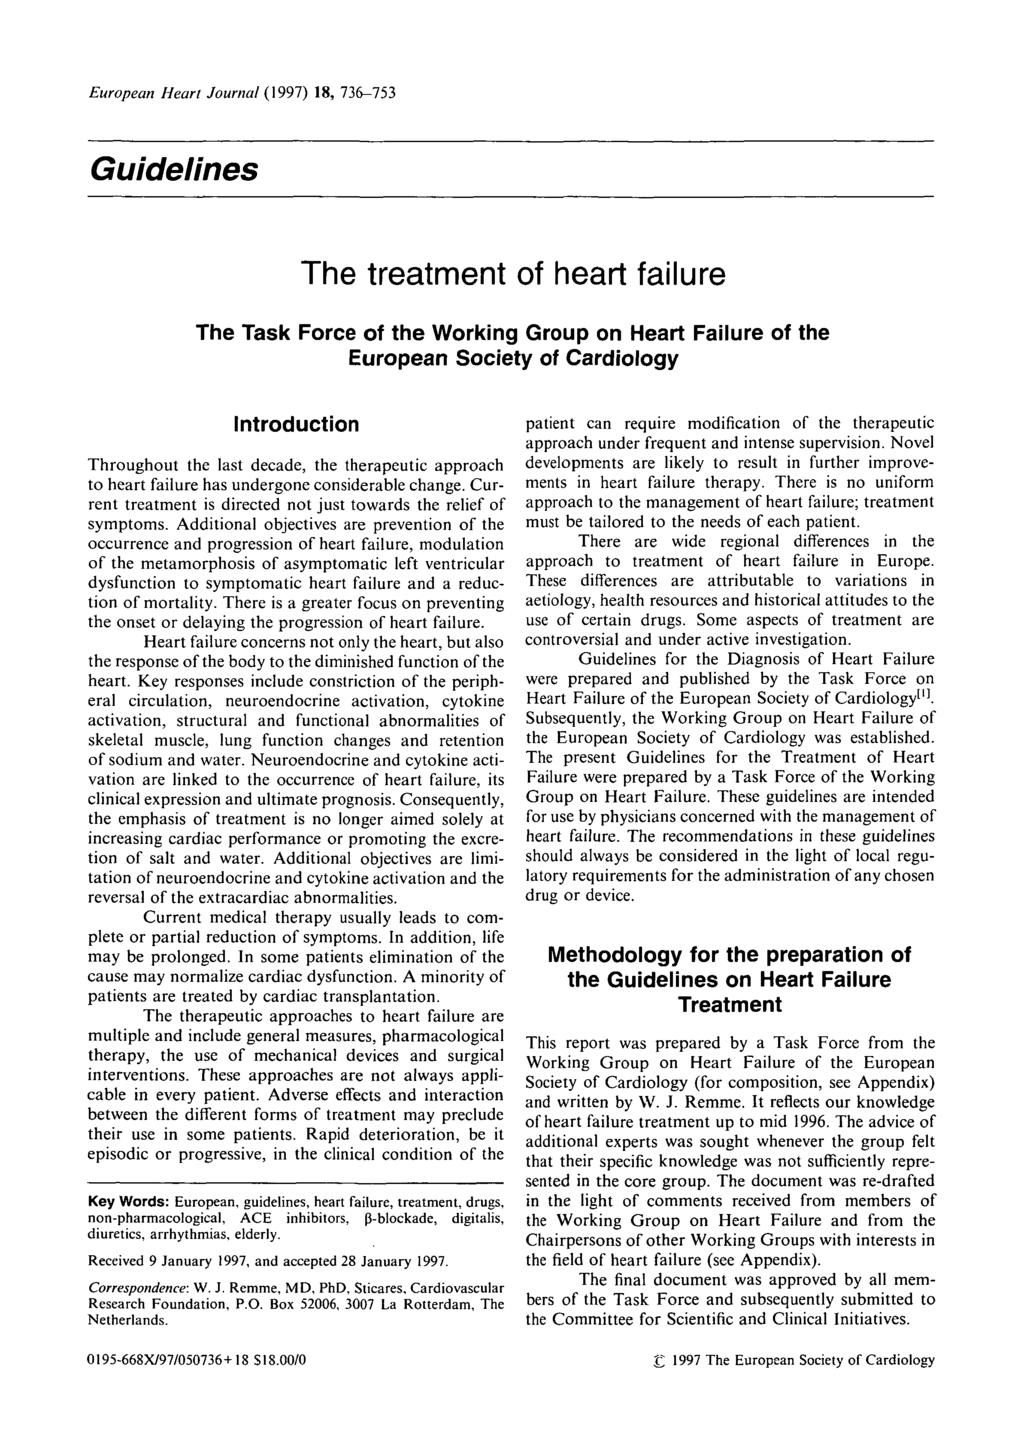 European Heart Journal (1997) 18, 736-753 Guidelines The treatment of heart failure The Task Force of the Working Group on Heart Failure of the European Society of Cardiology Introduction Throughout